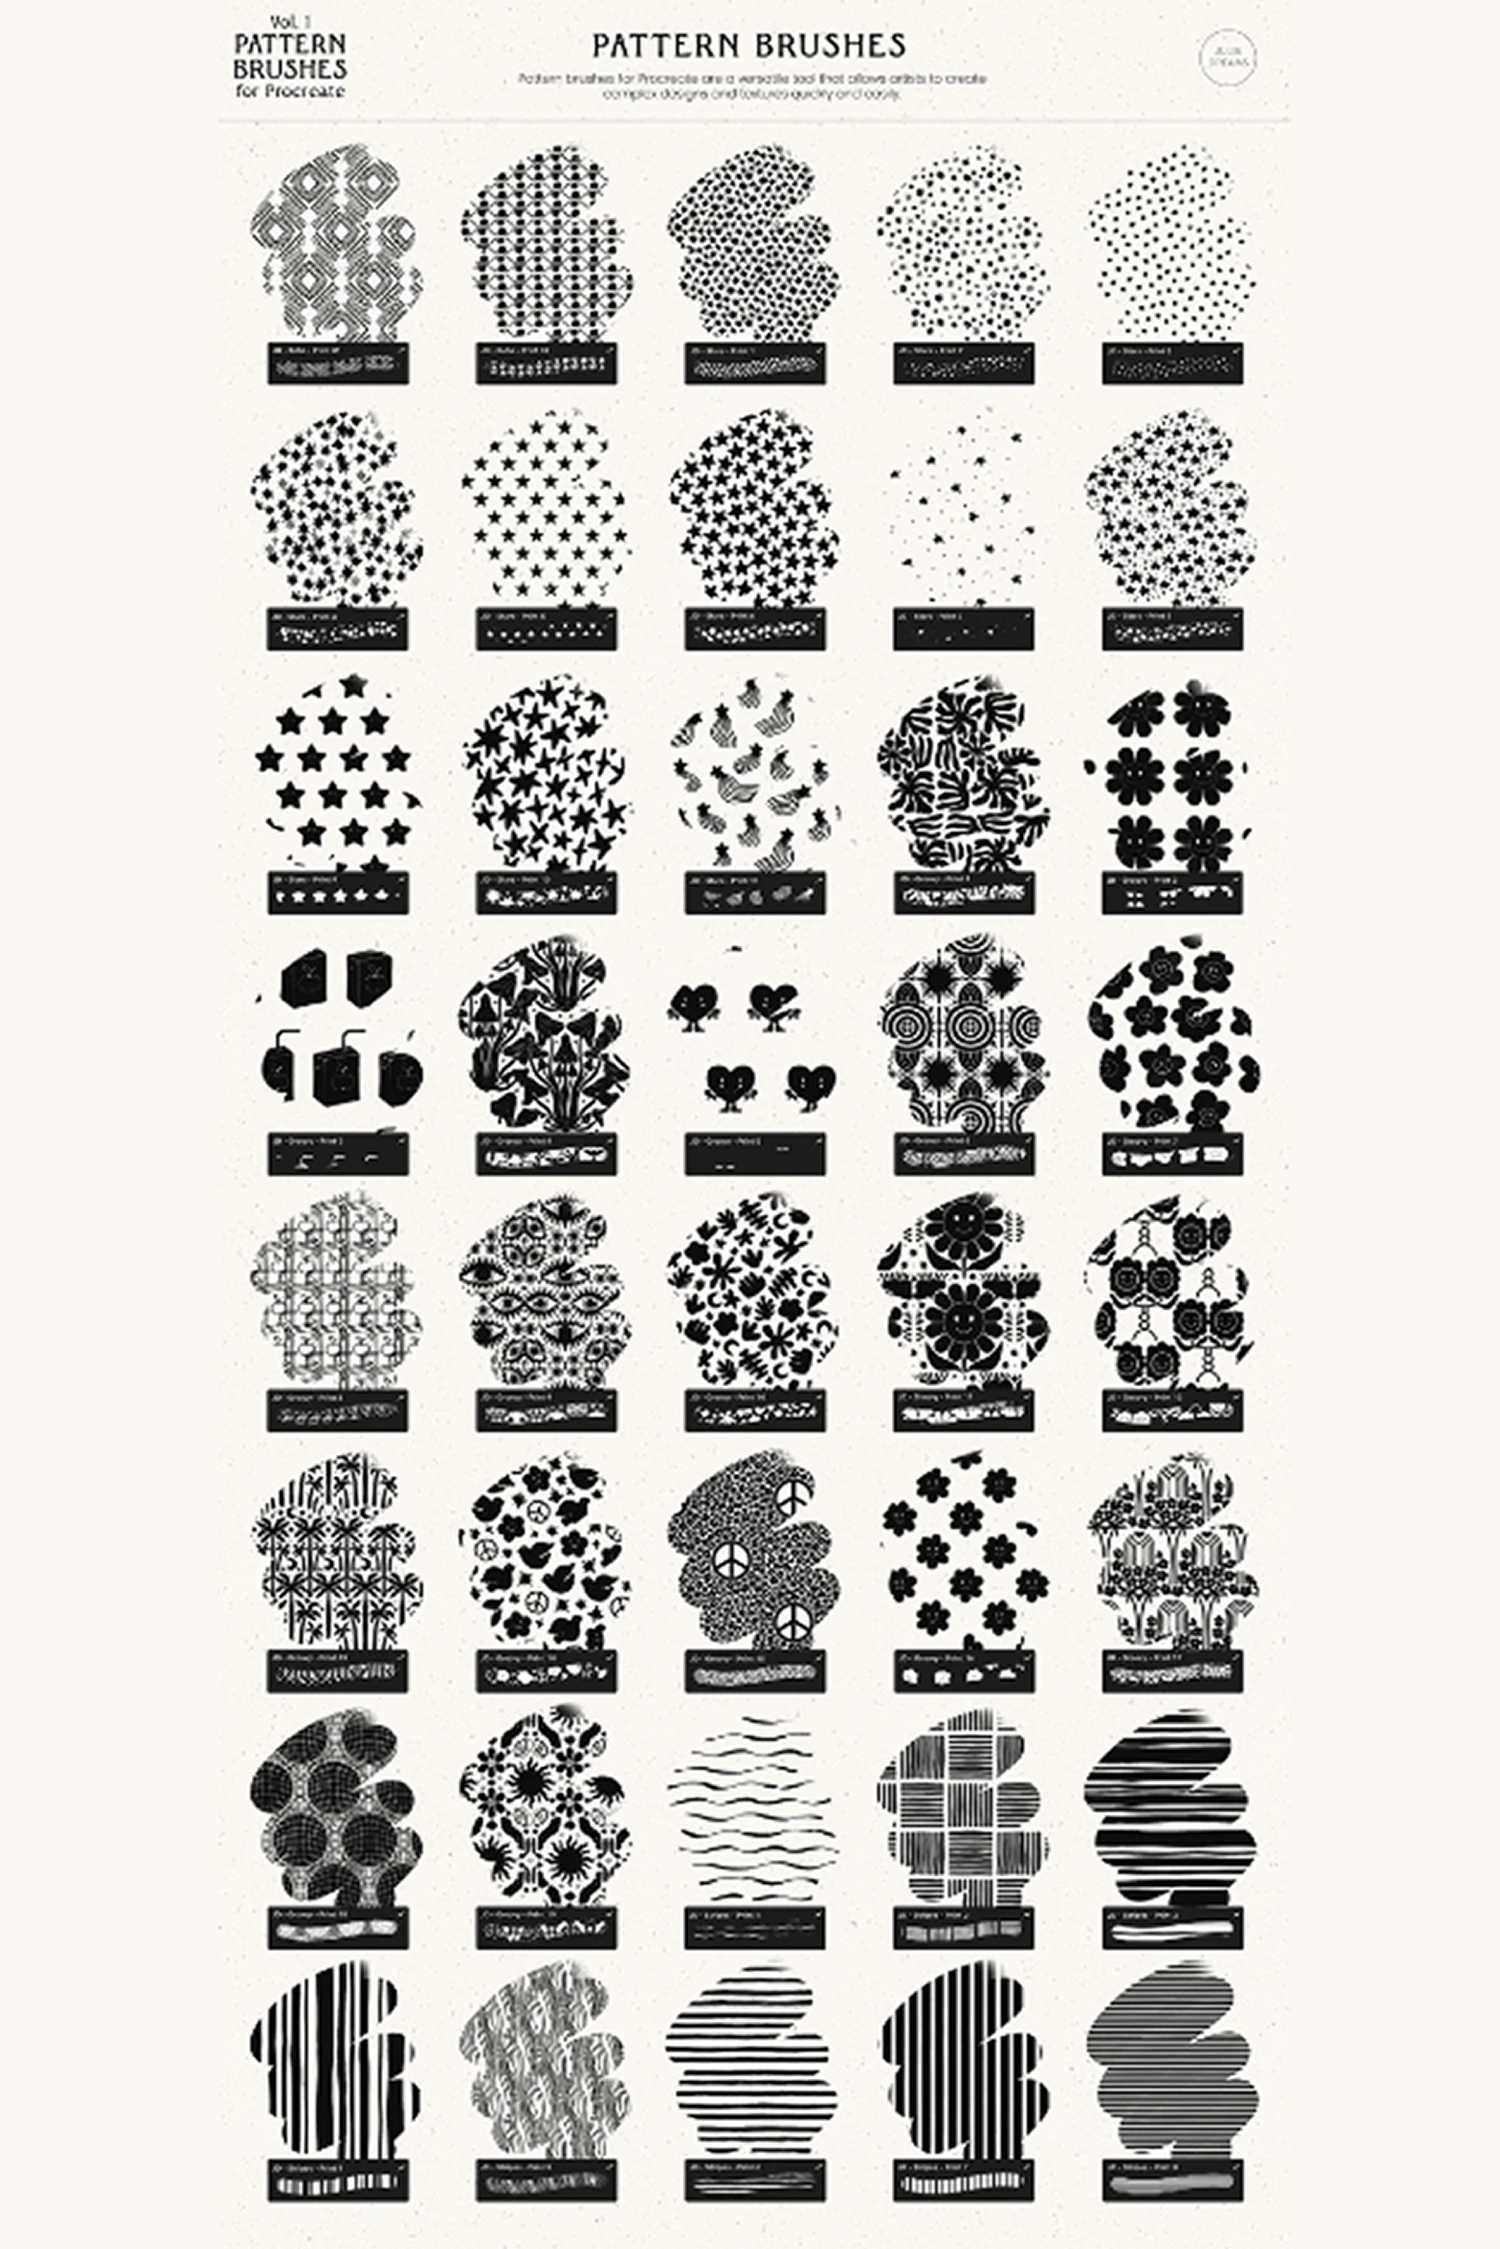 Pattern Brushes Vol 1 by Julia Dreams